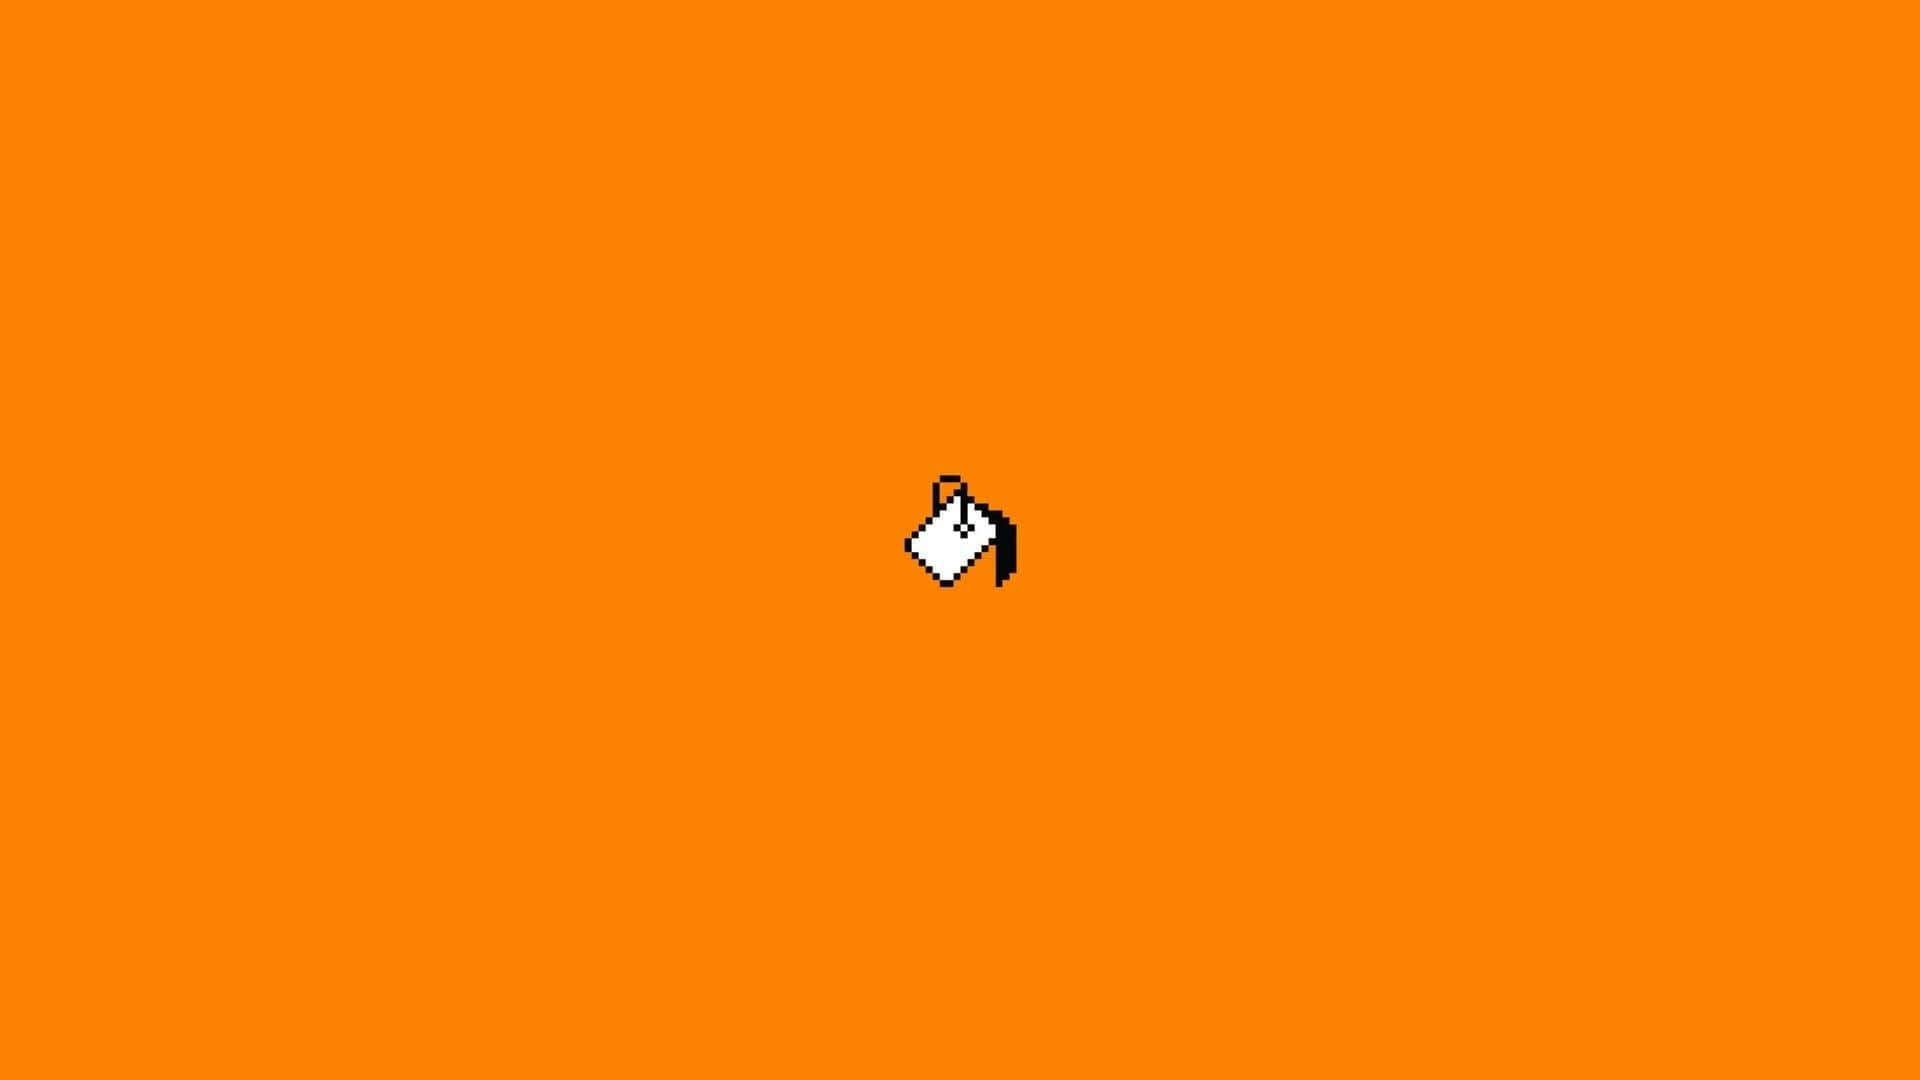 A Black And White Logo On An Orange Background